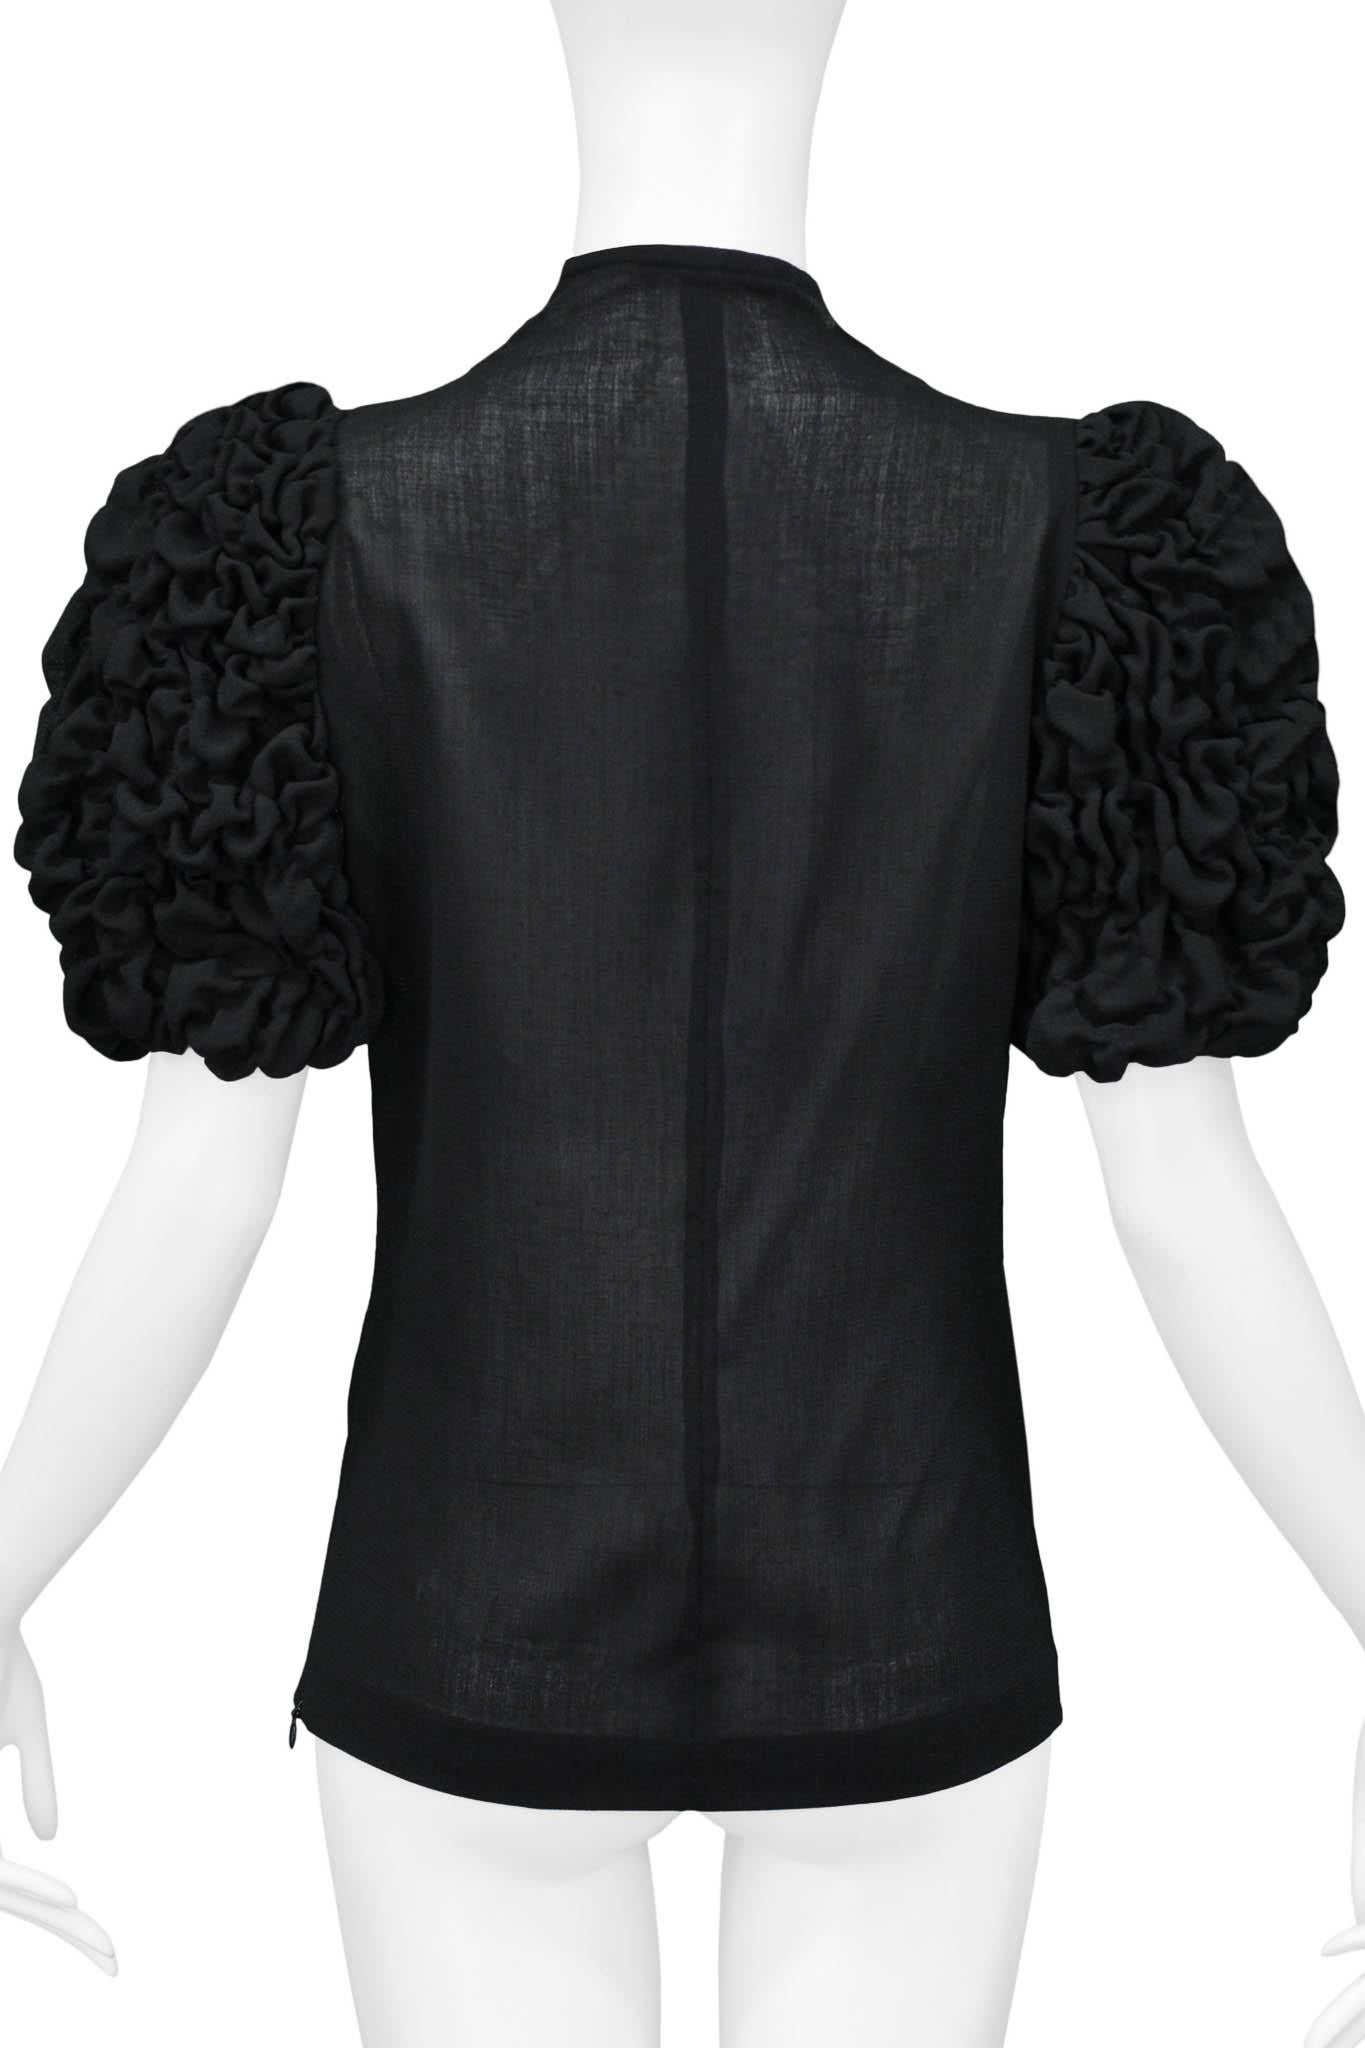 Alexander McQueen Black Top With Puckered Shoulders AW 1999 Overlook Collection For Sale 1